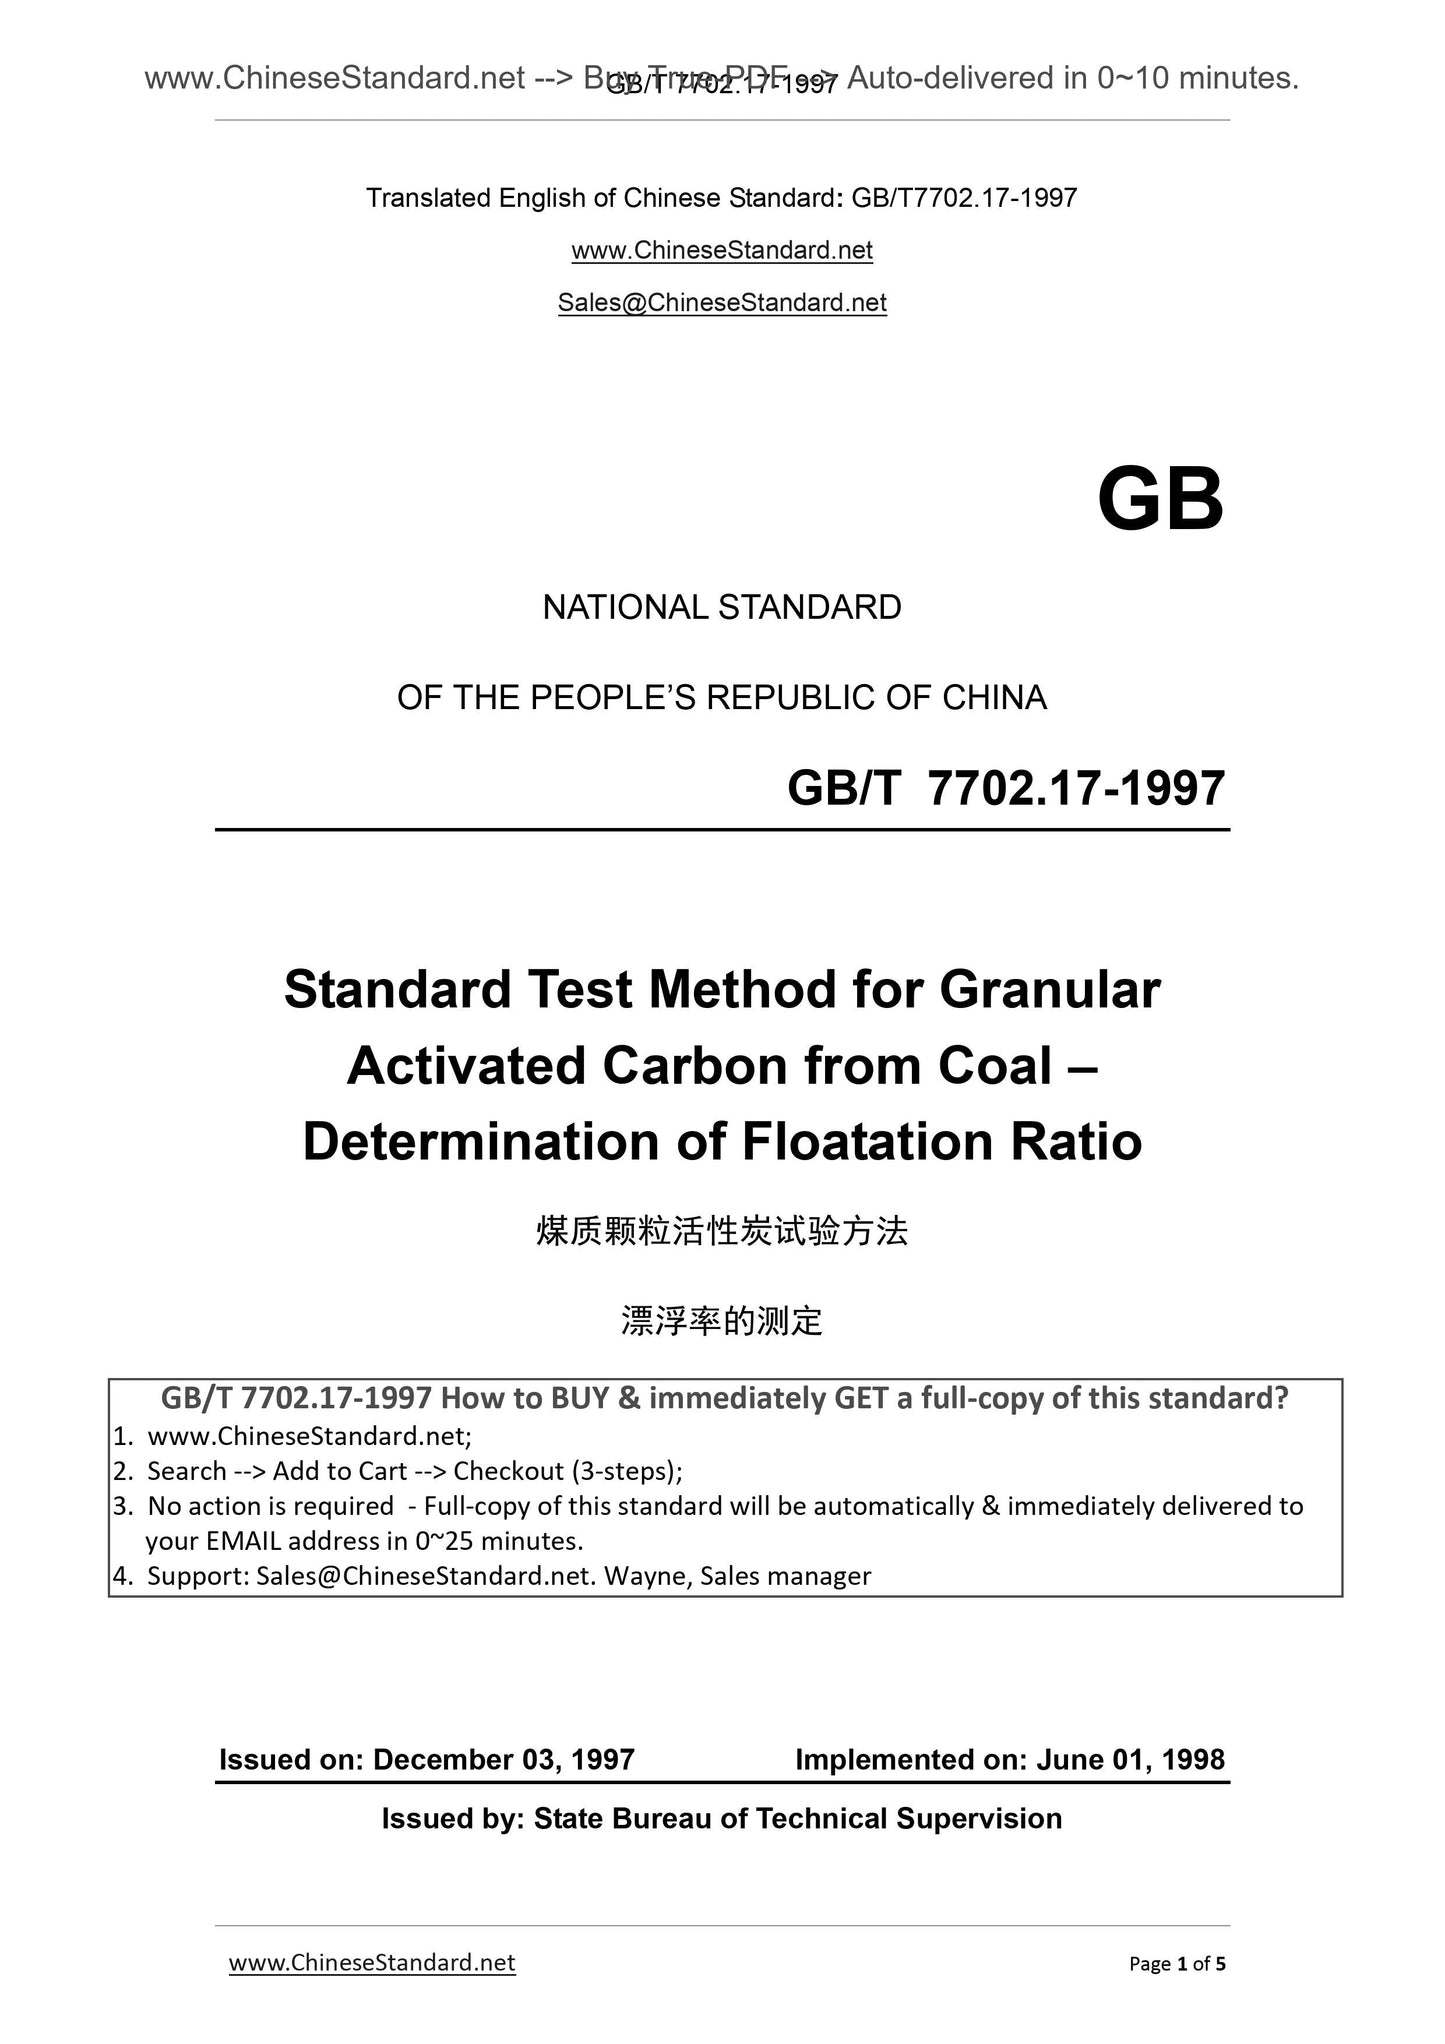 GB/T 7702.17-1997 Page 1